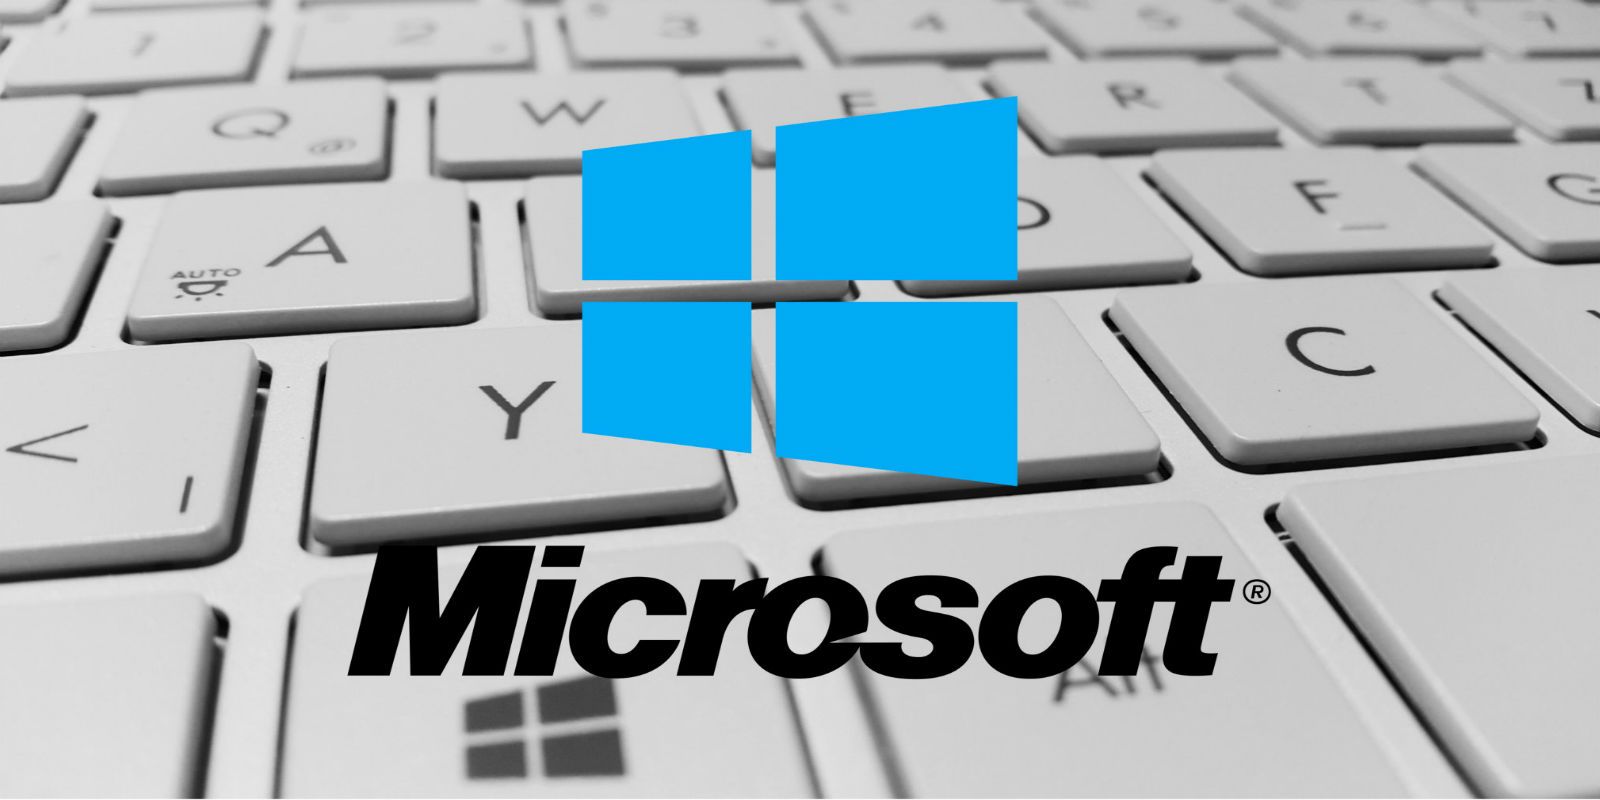 Image showing the Microsoft Windows logo with a keyboard in the background